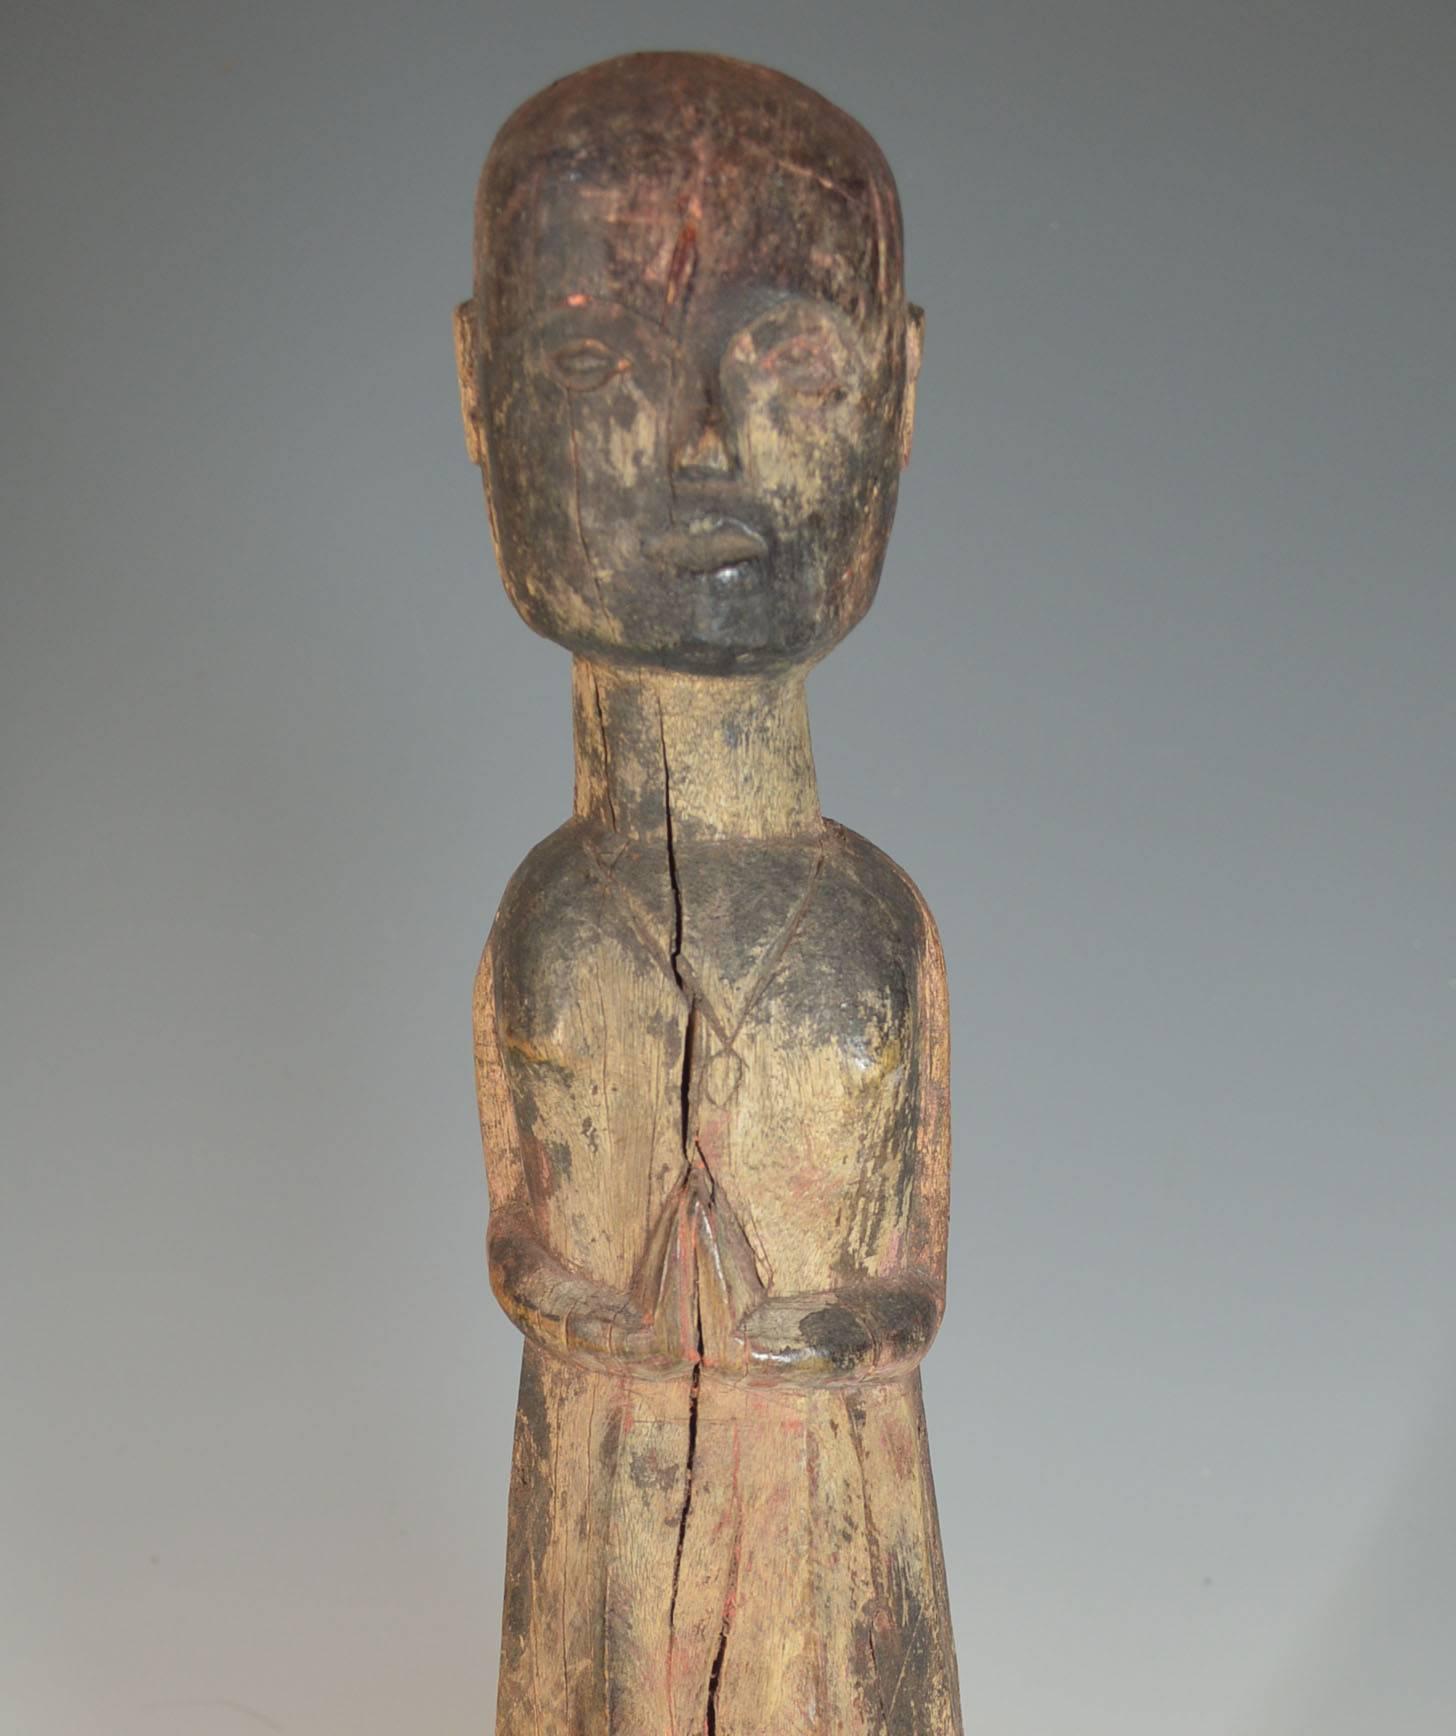 A old ancestor figure from the Tharu people of Southern Nepal.
The standing guardian figure, the face with serene enigmatic expression, the hands held in front in Namaste salutation.
Ancient weathered patina with remains of pigments, old age